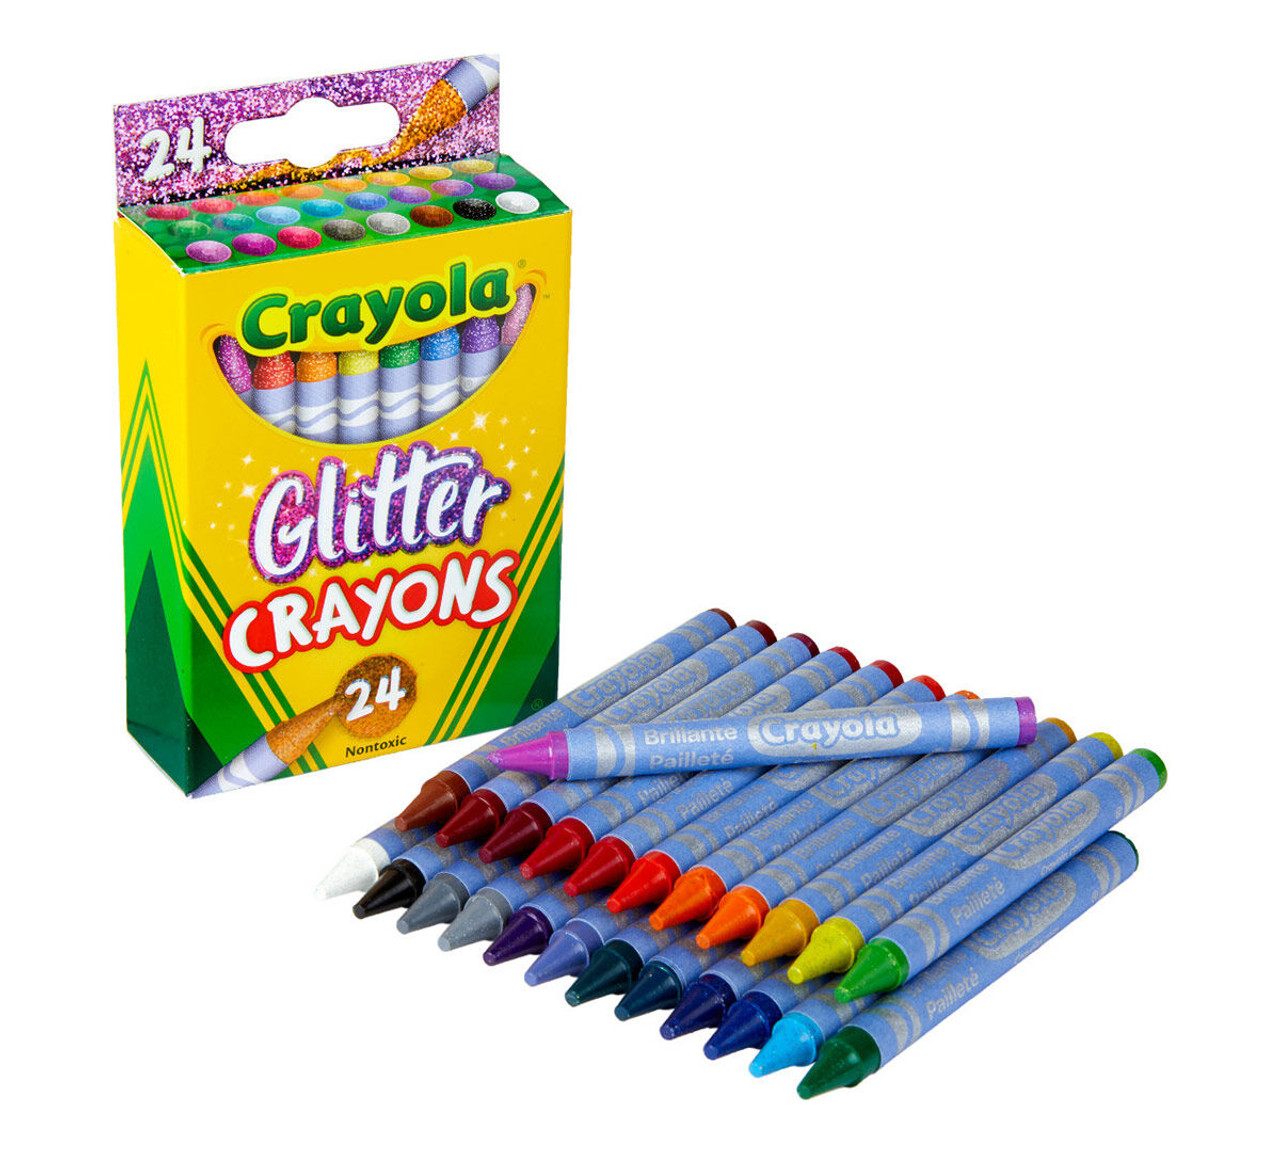 https://cdn11.bigcommerce.com/s-zsd7fw84a7/images/stencil/1280x1280/products/3282/4814/crayola_glitter_crayons__67408.1587699726.jpg?c=2